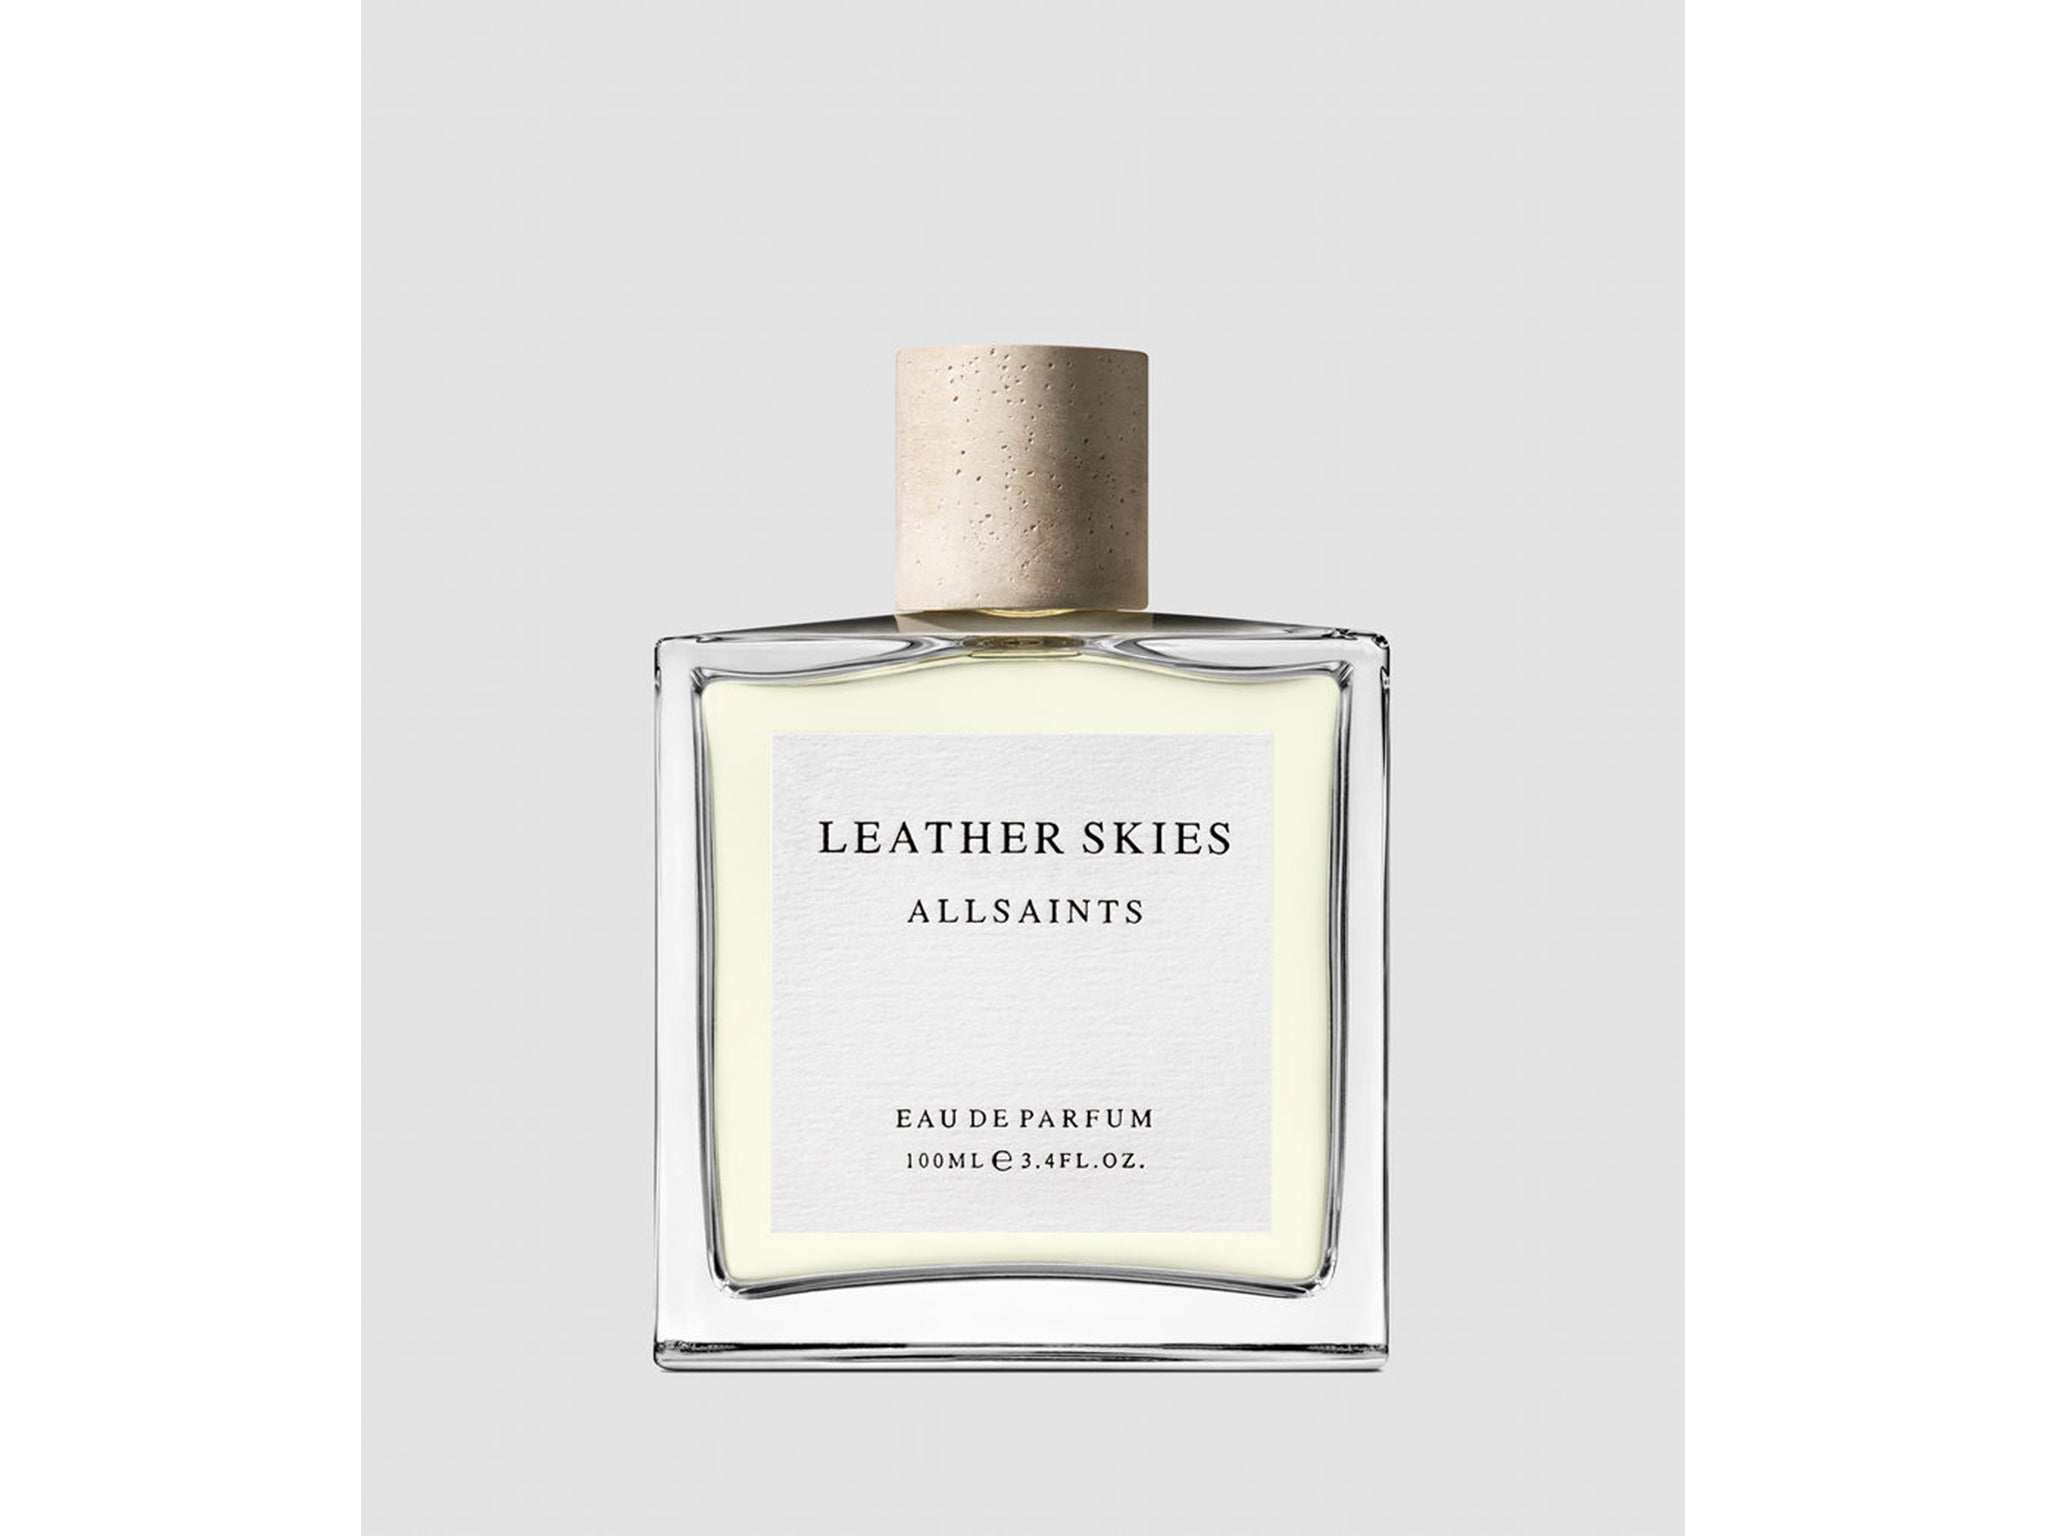 As the seasons change, headier scents such as leather are the perfect fit